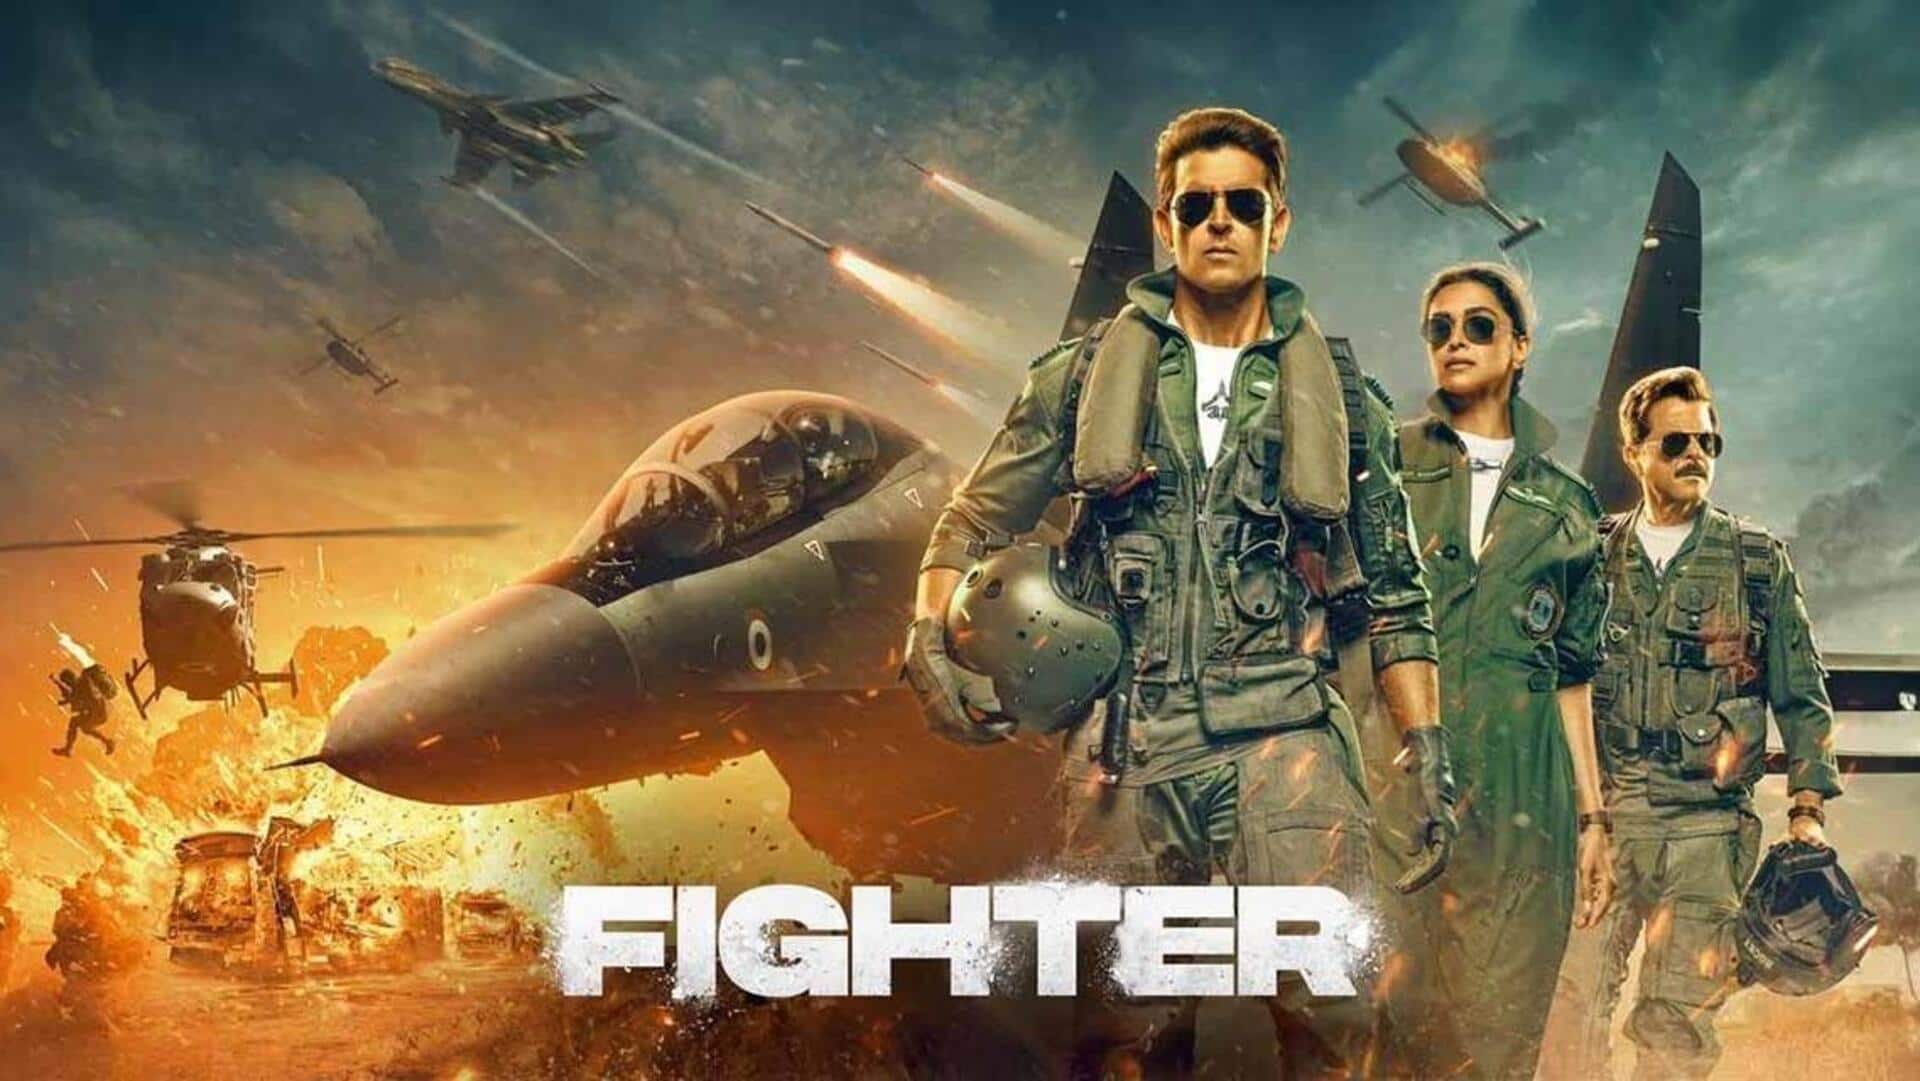 Box office collection: 'Fighter' is on autopilot mode